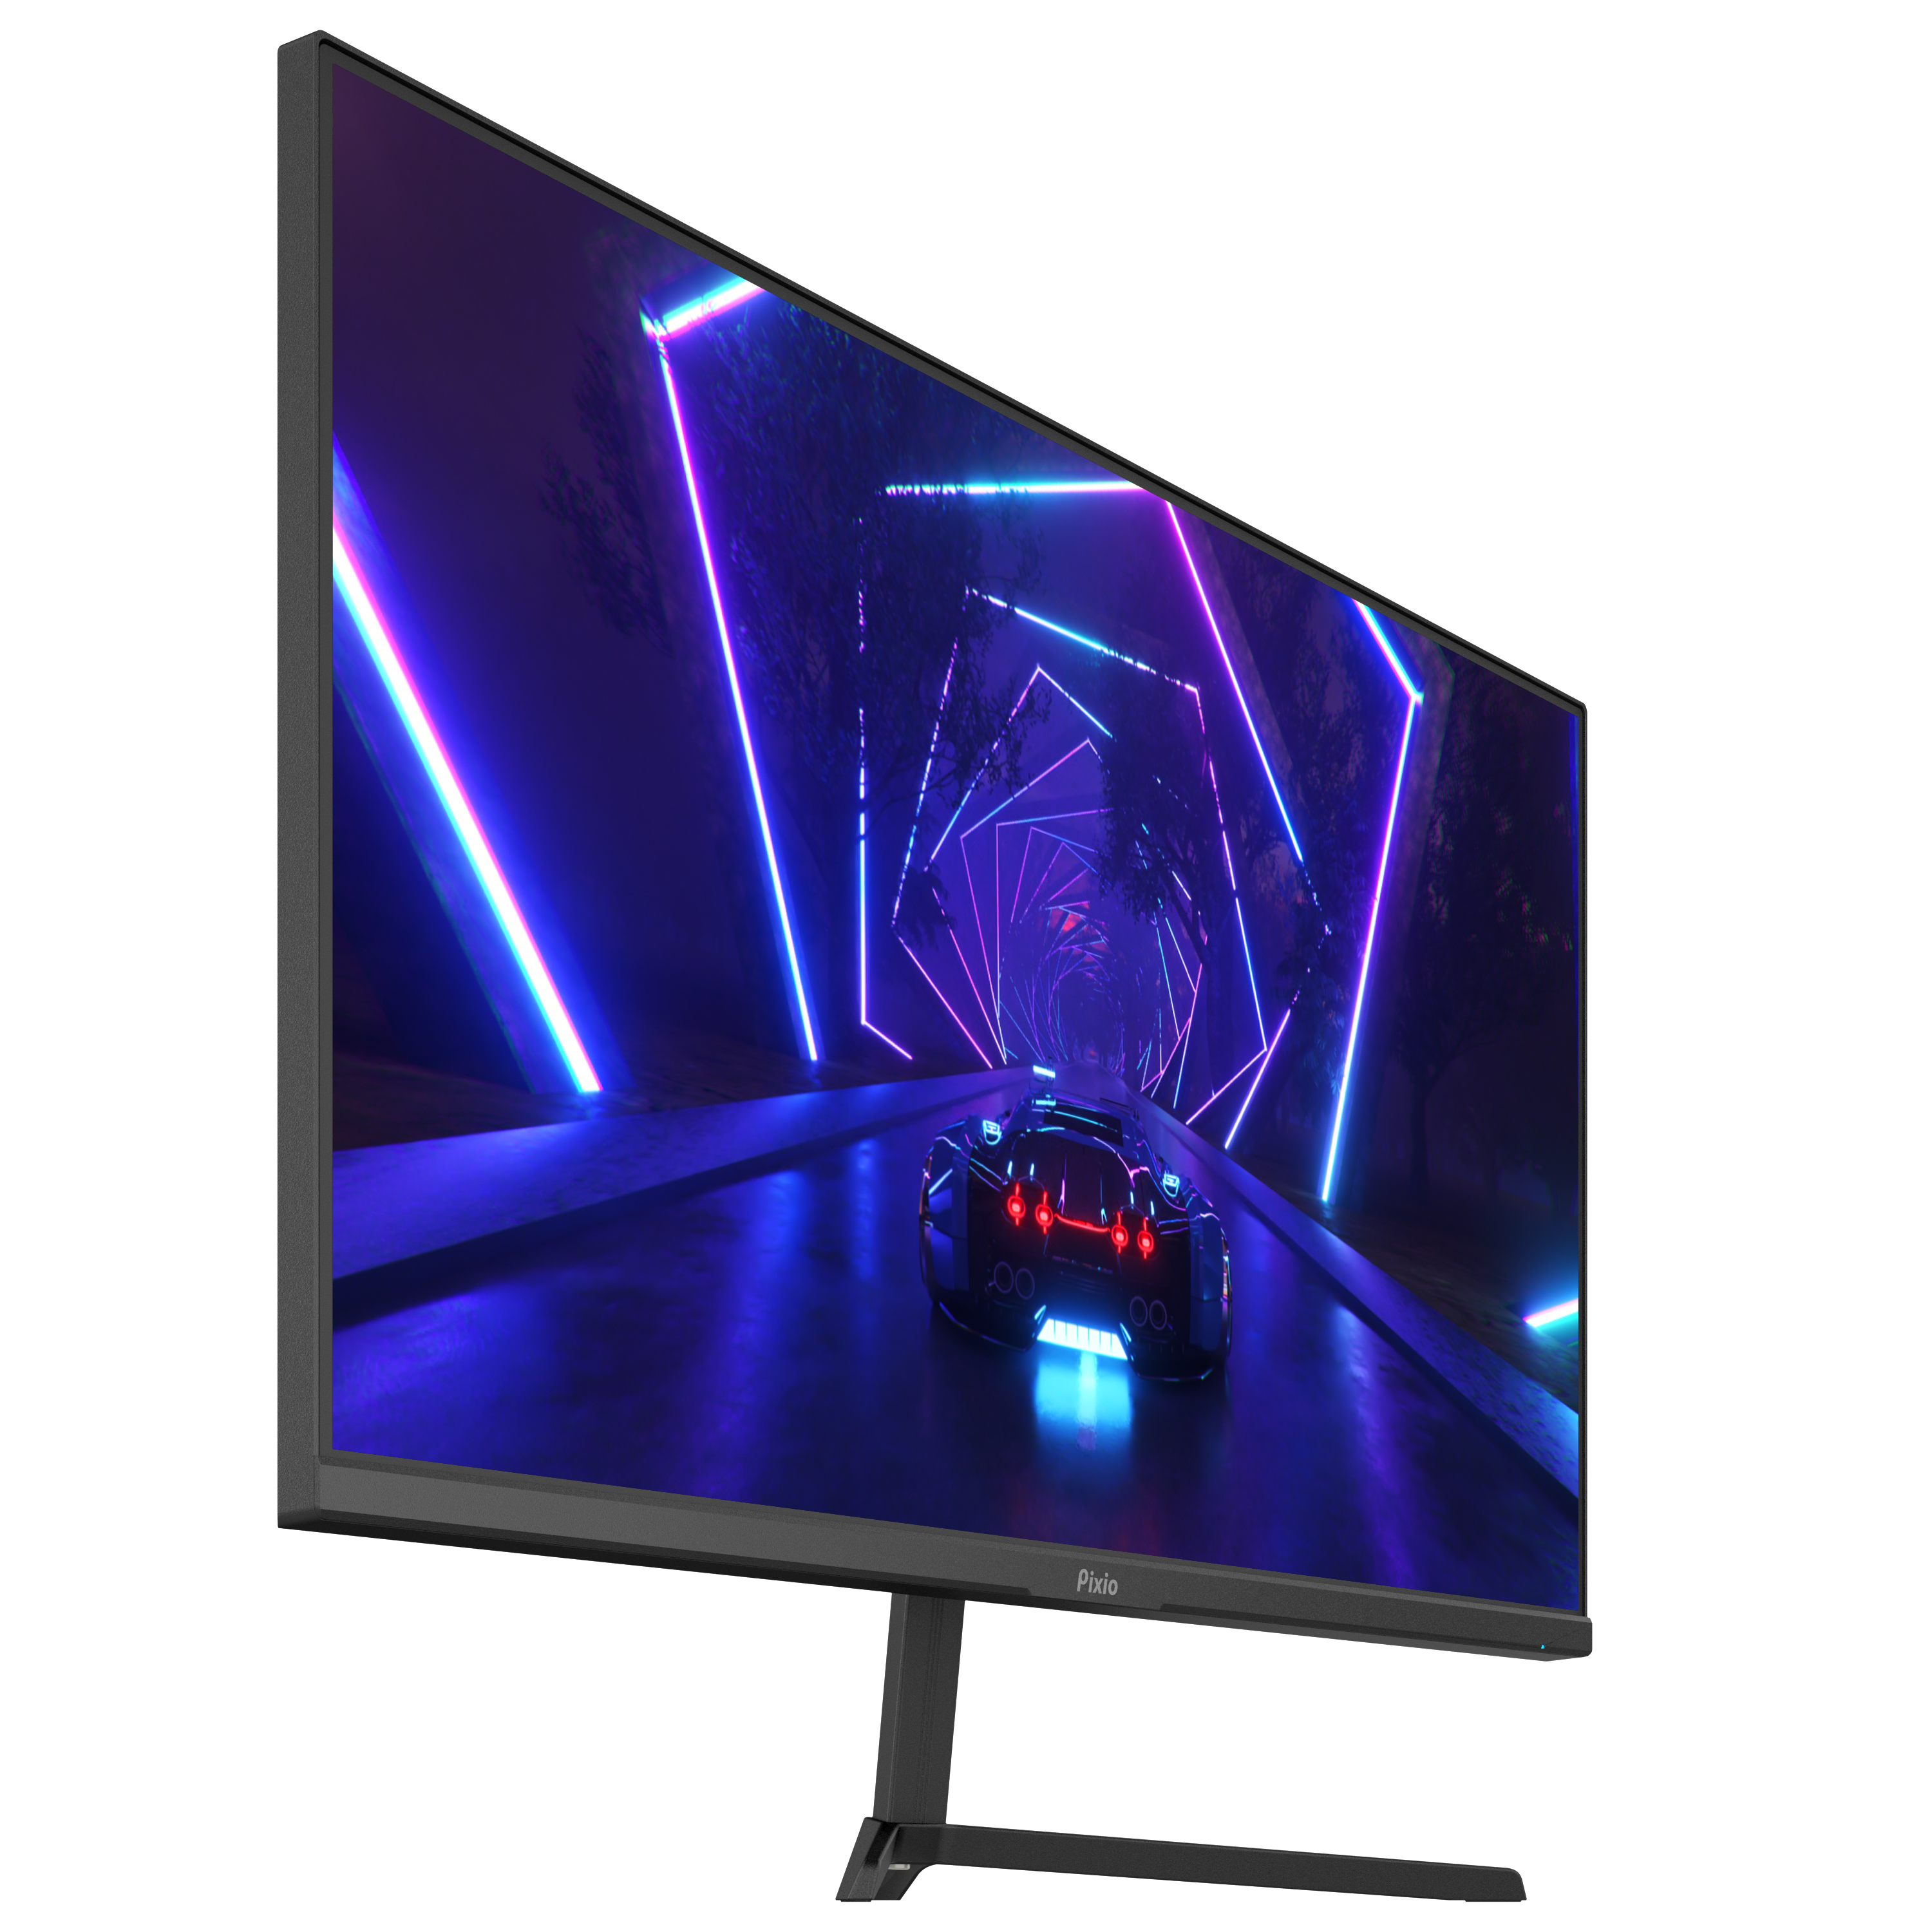 PX248 Prime S Gaming Monitor